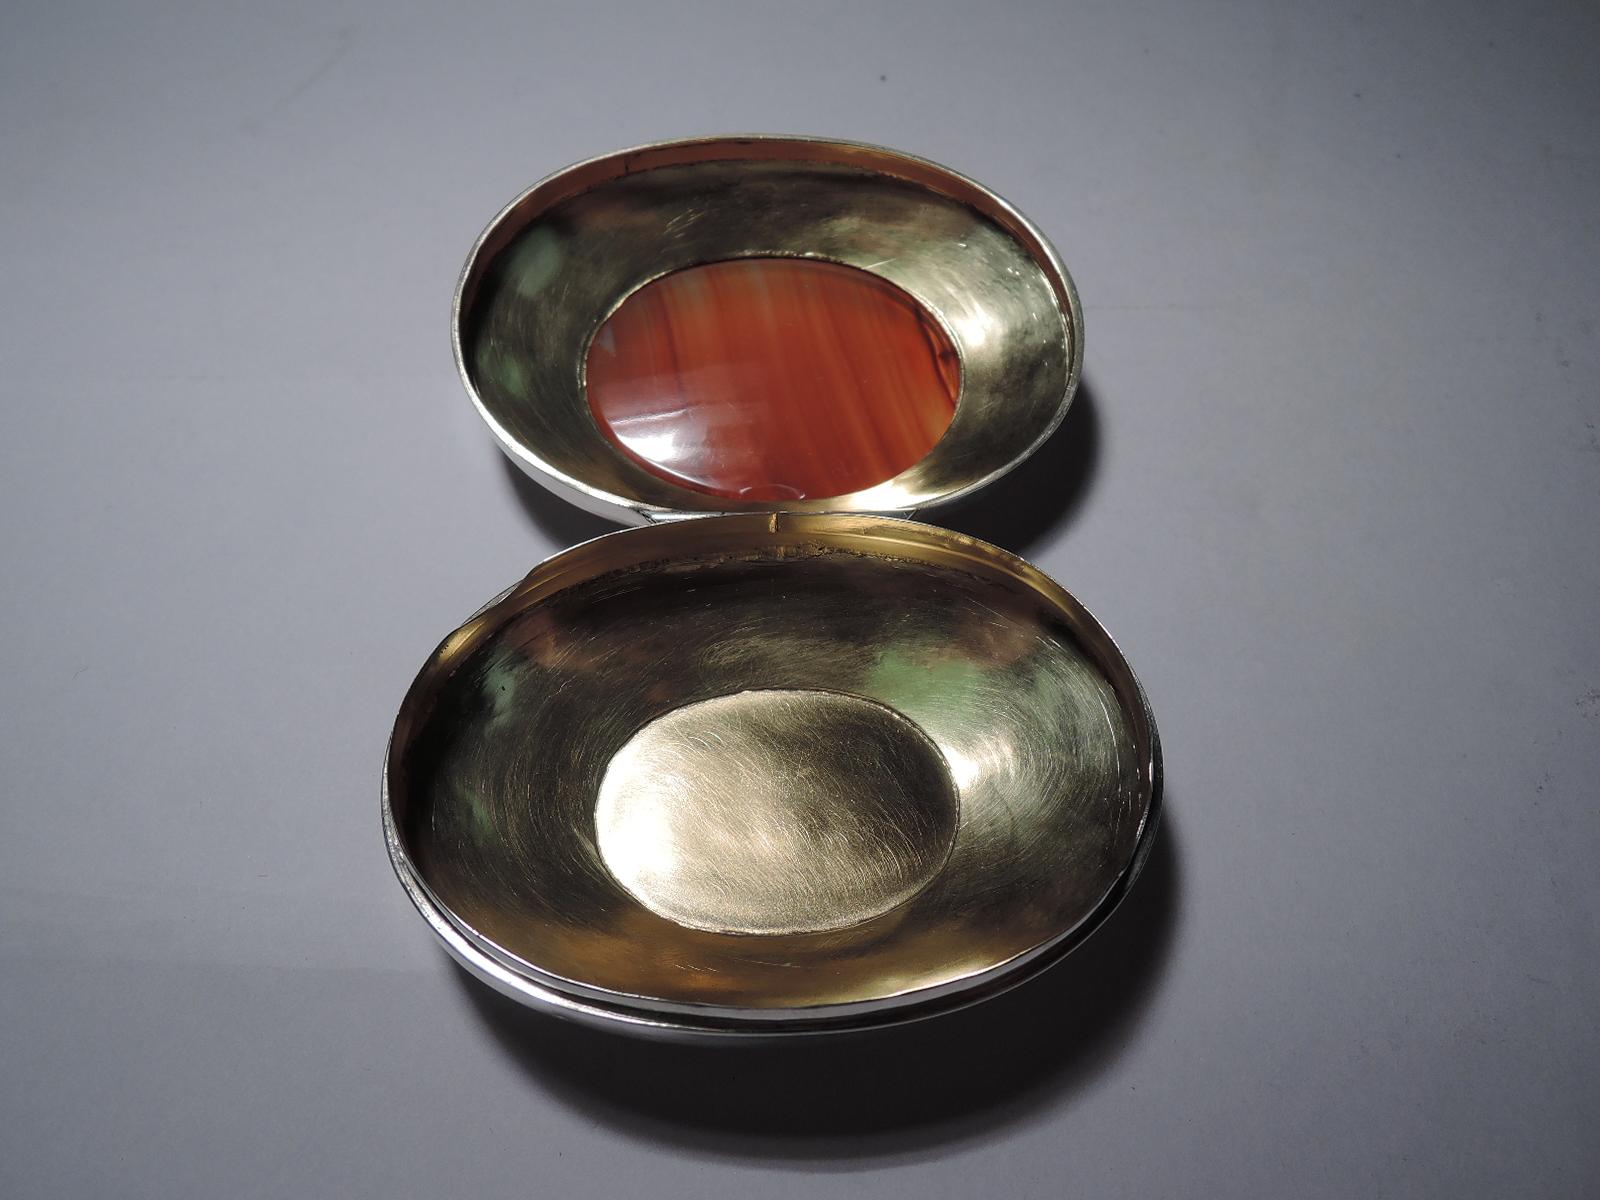 English Victorian sterling silver and agate box, 1876. Oval with canted shoulders. Cover hinged and inset with translucent red agate. Gilt interior. Fully marked including indistinct maker's mark and Birmingham assay stamp. Total weight: 2.4 troy